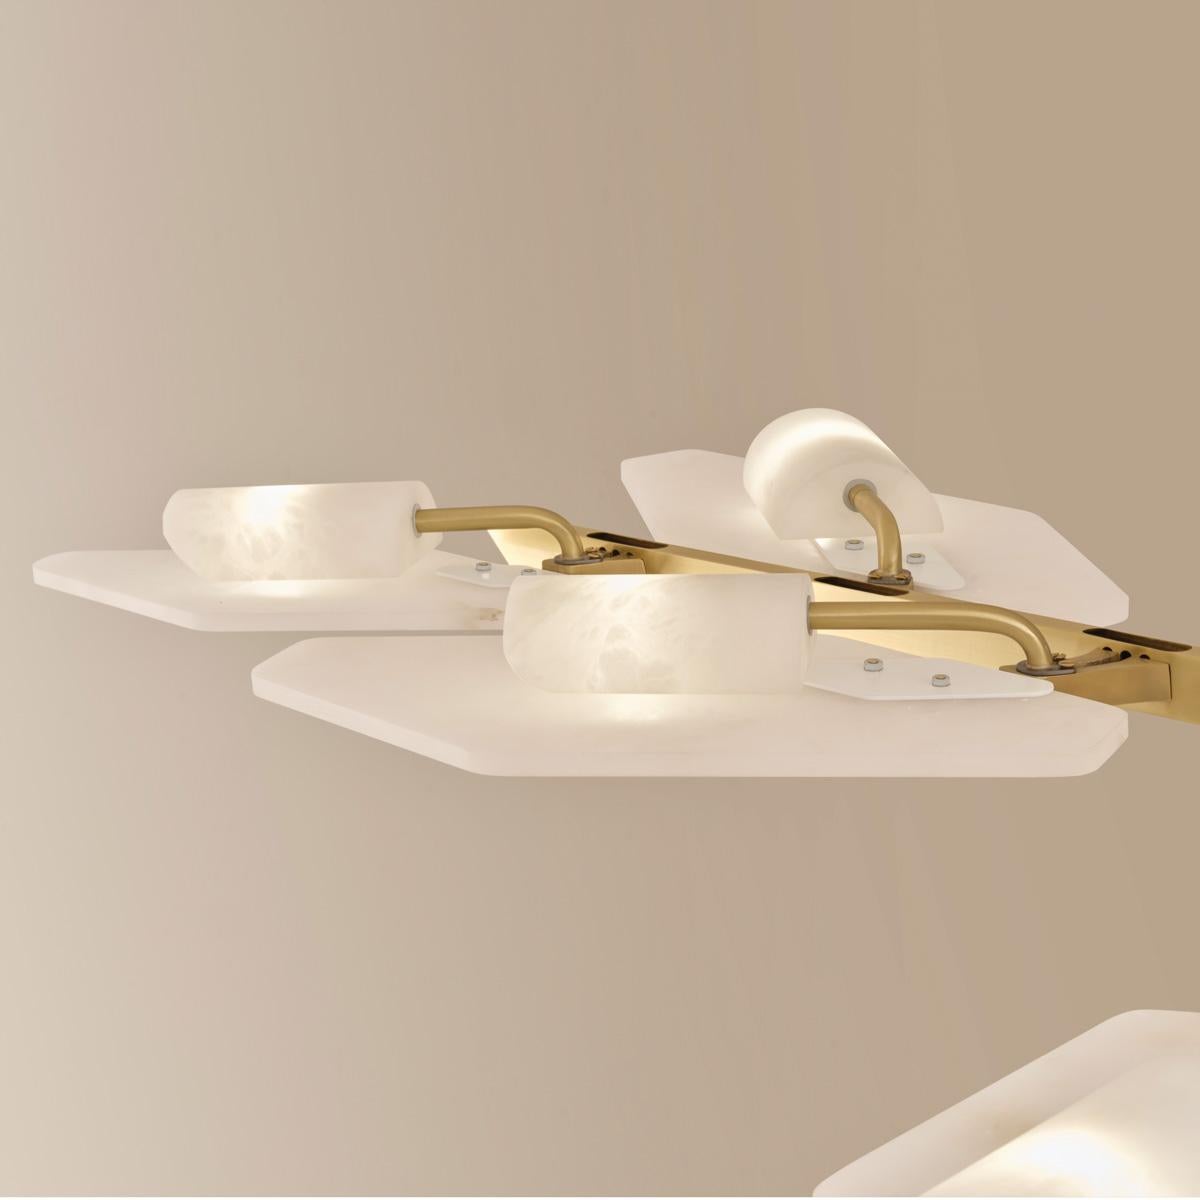 Leaf Ceiling Light by Gaspare Asaro-Satin Brass Finish For Sale 3